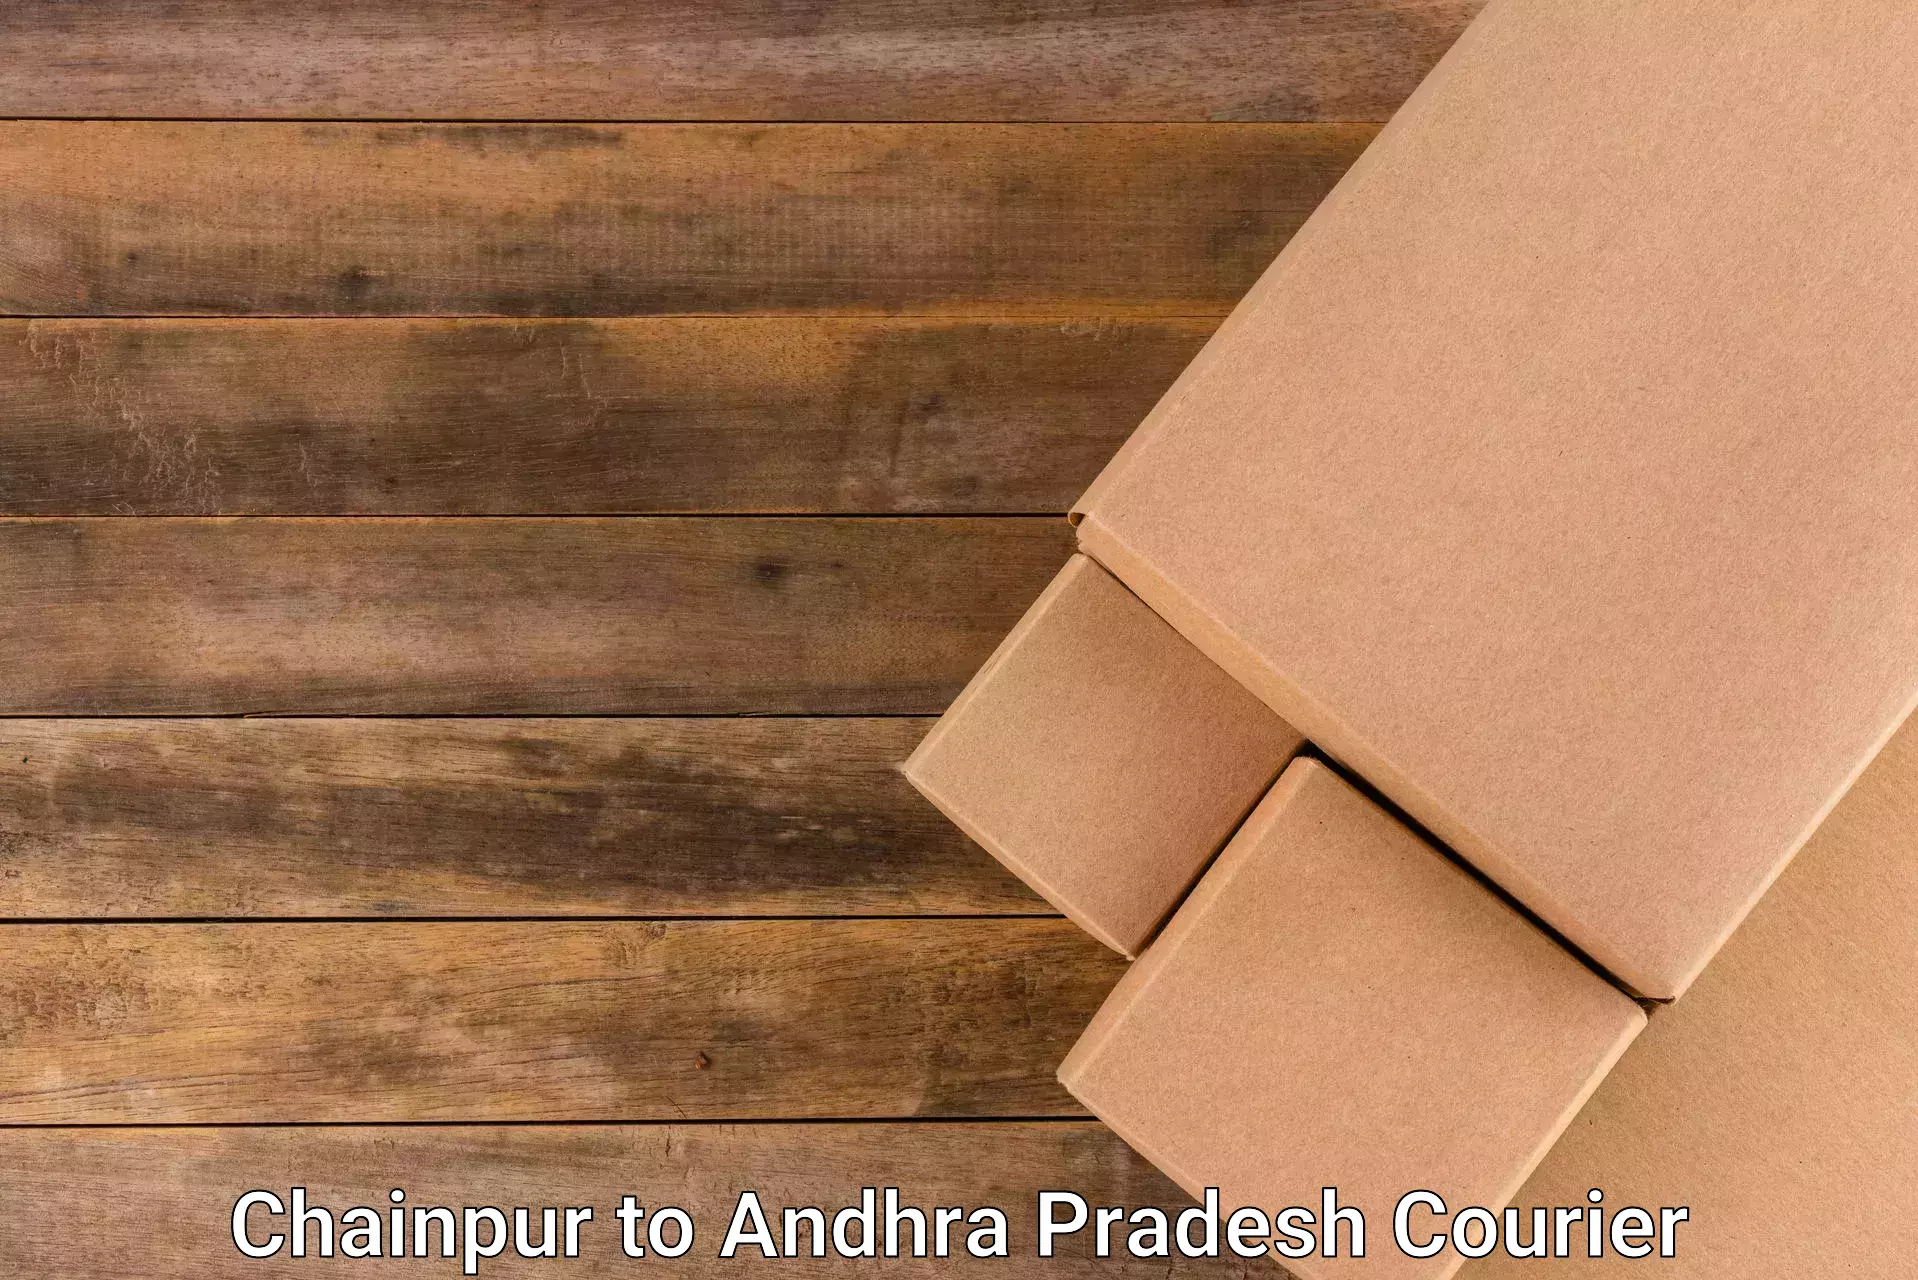 Express mail solutions in Chainpur to Tirupati